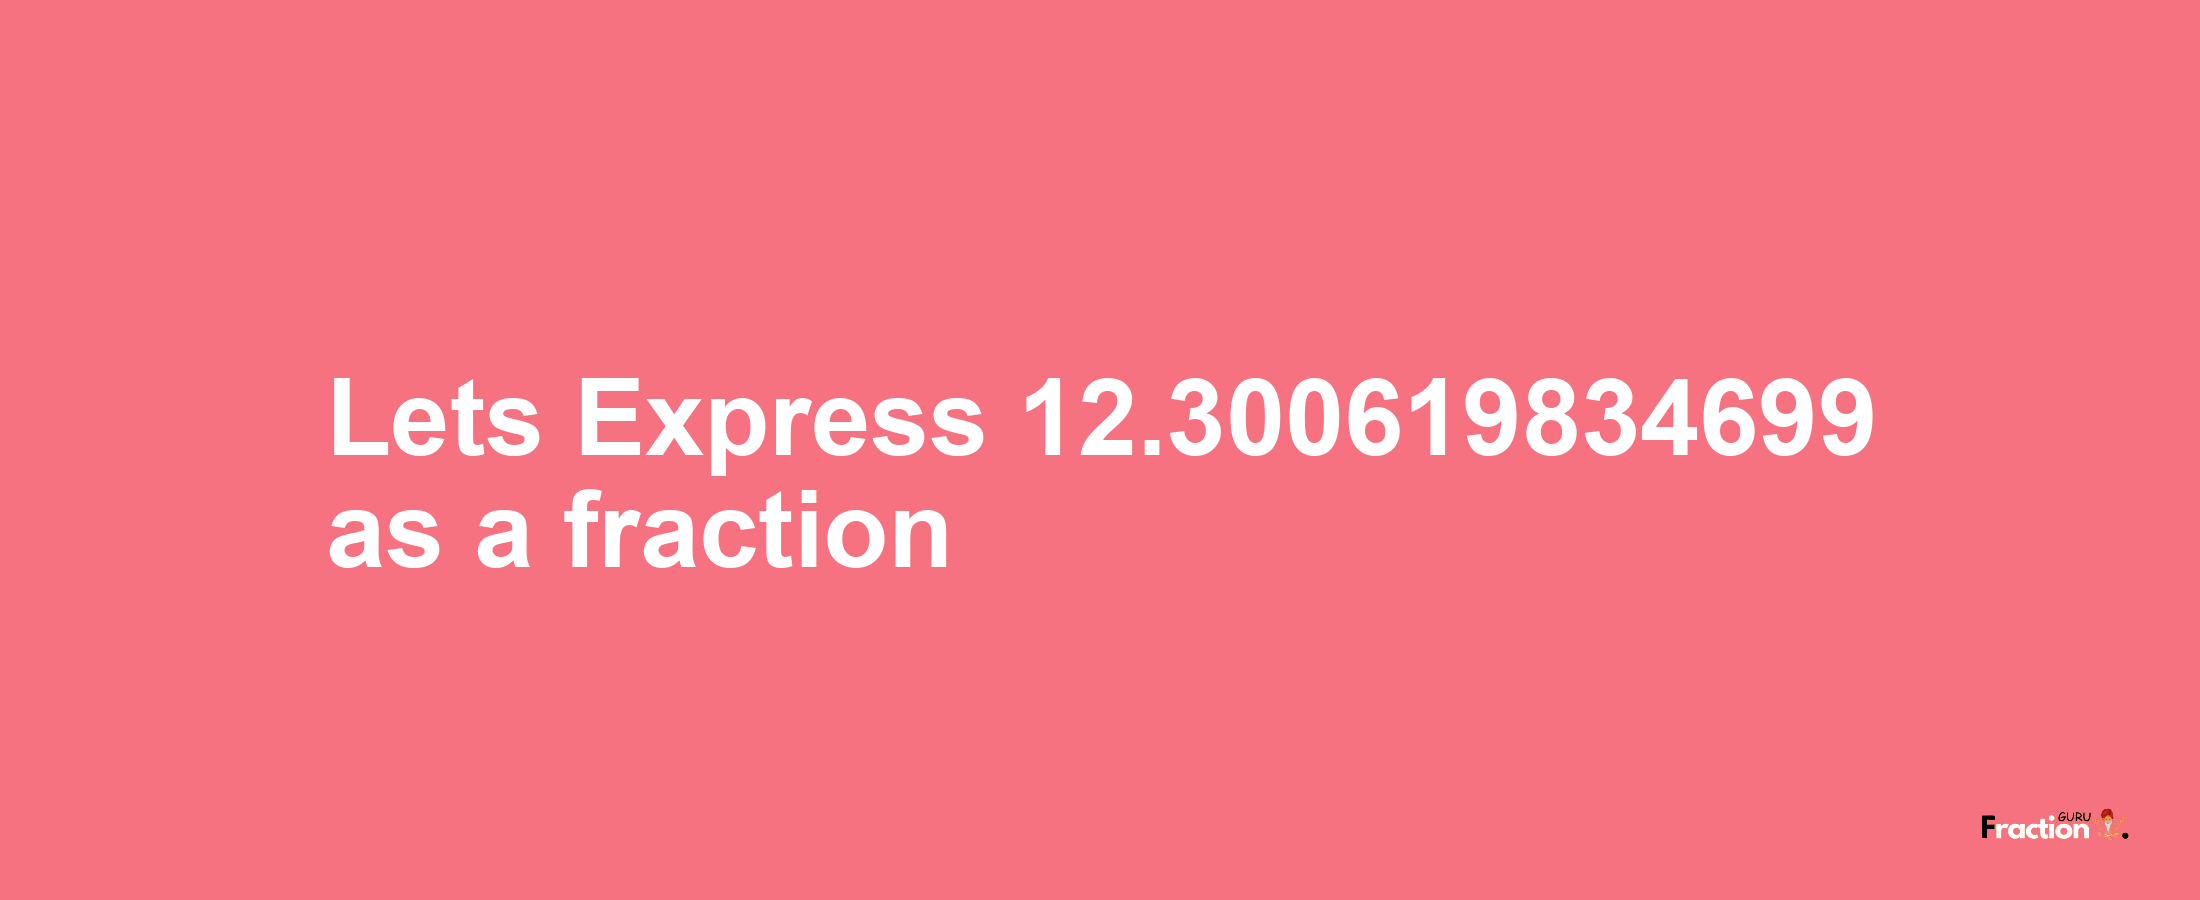 Lets Express 12.300619834699 as afraction